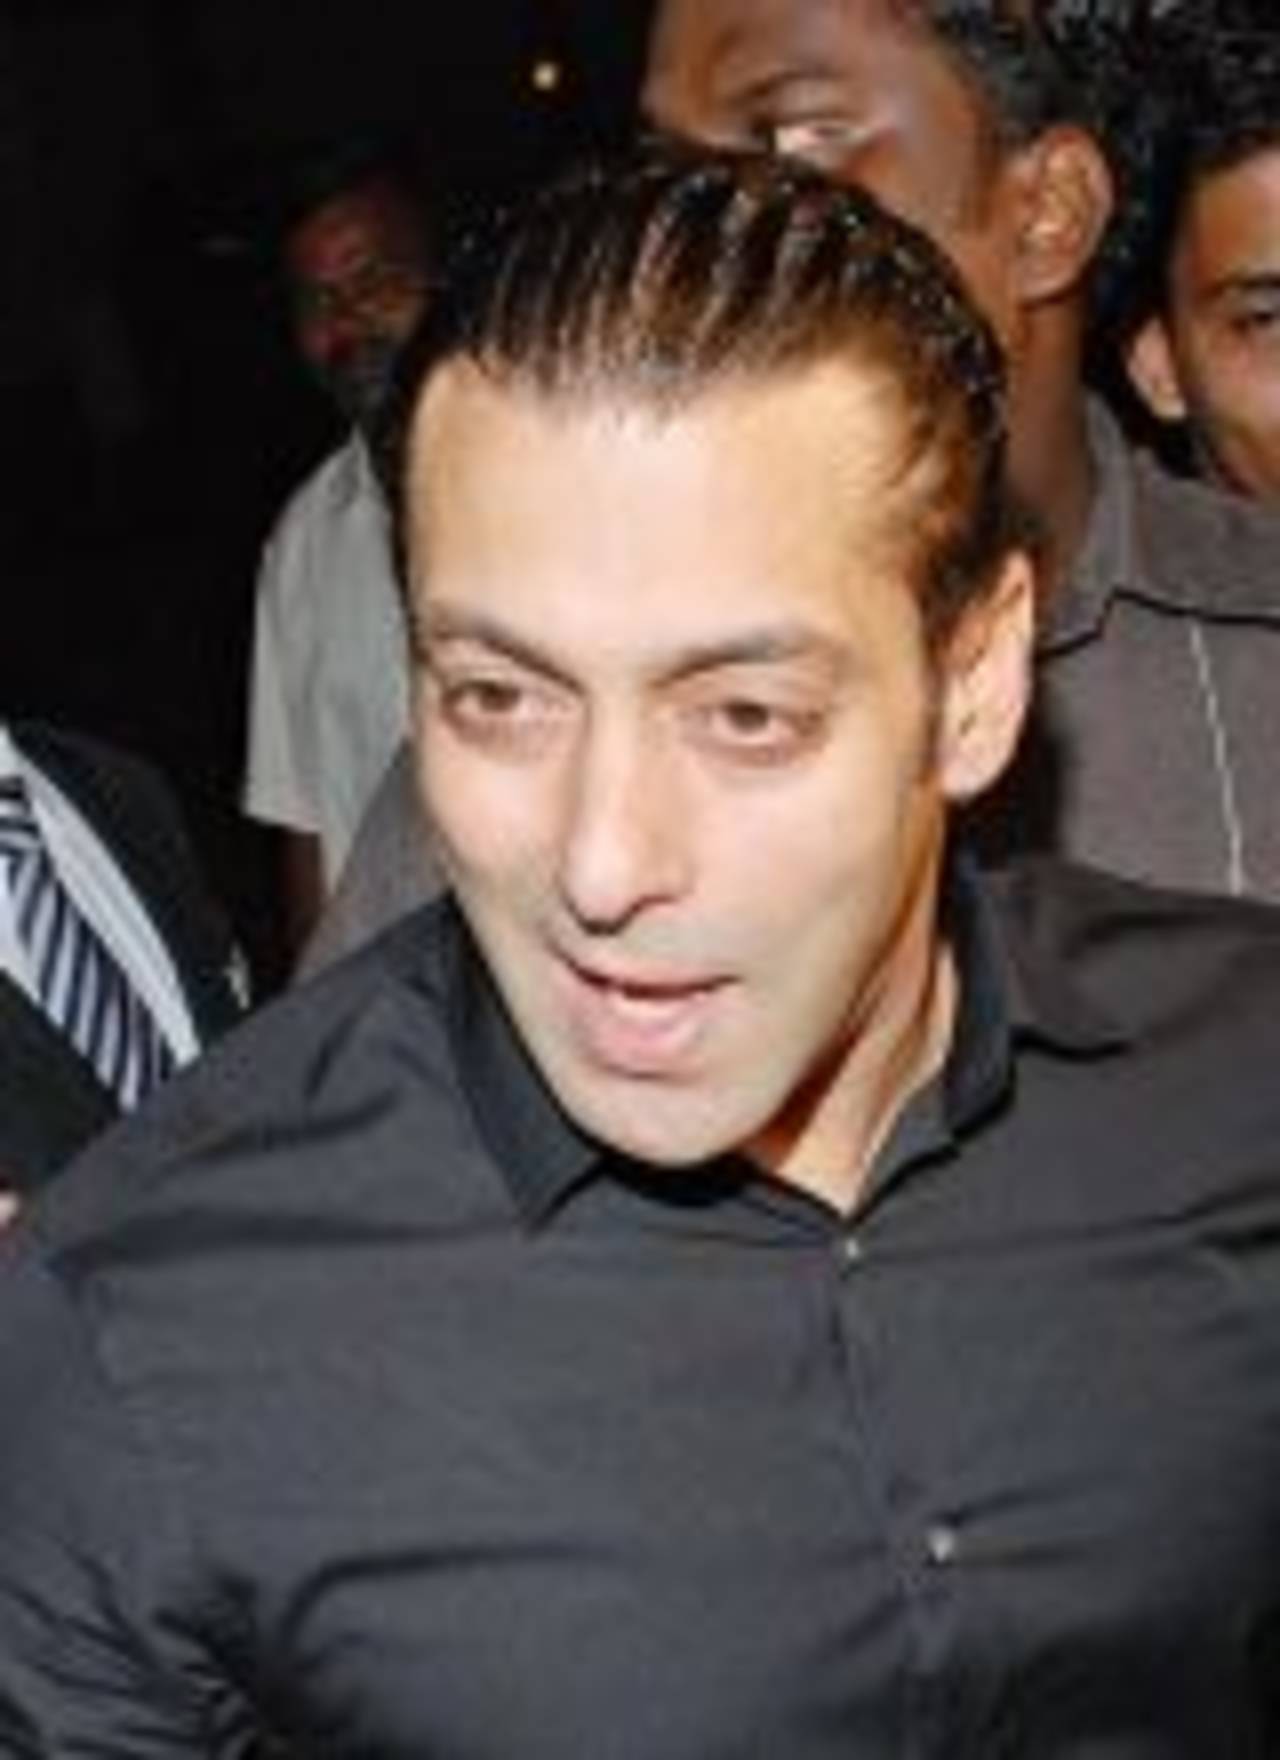 Bollywood actor Salman Khan has expressed his interest in buying an IPL franchise